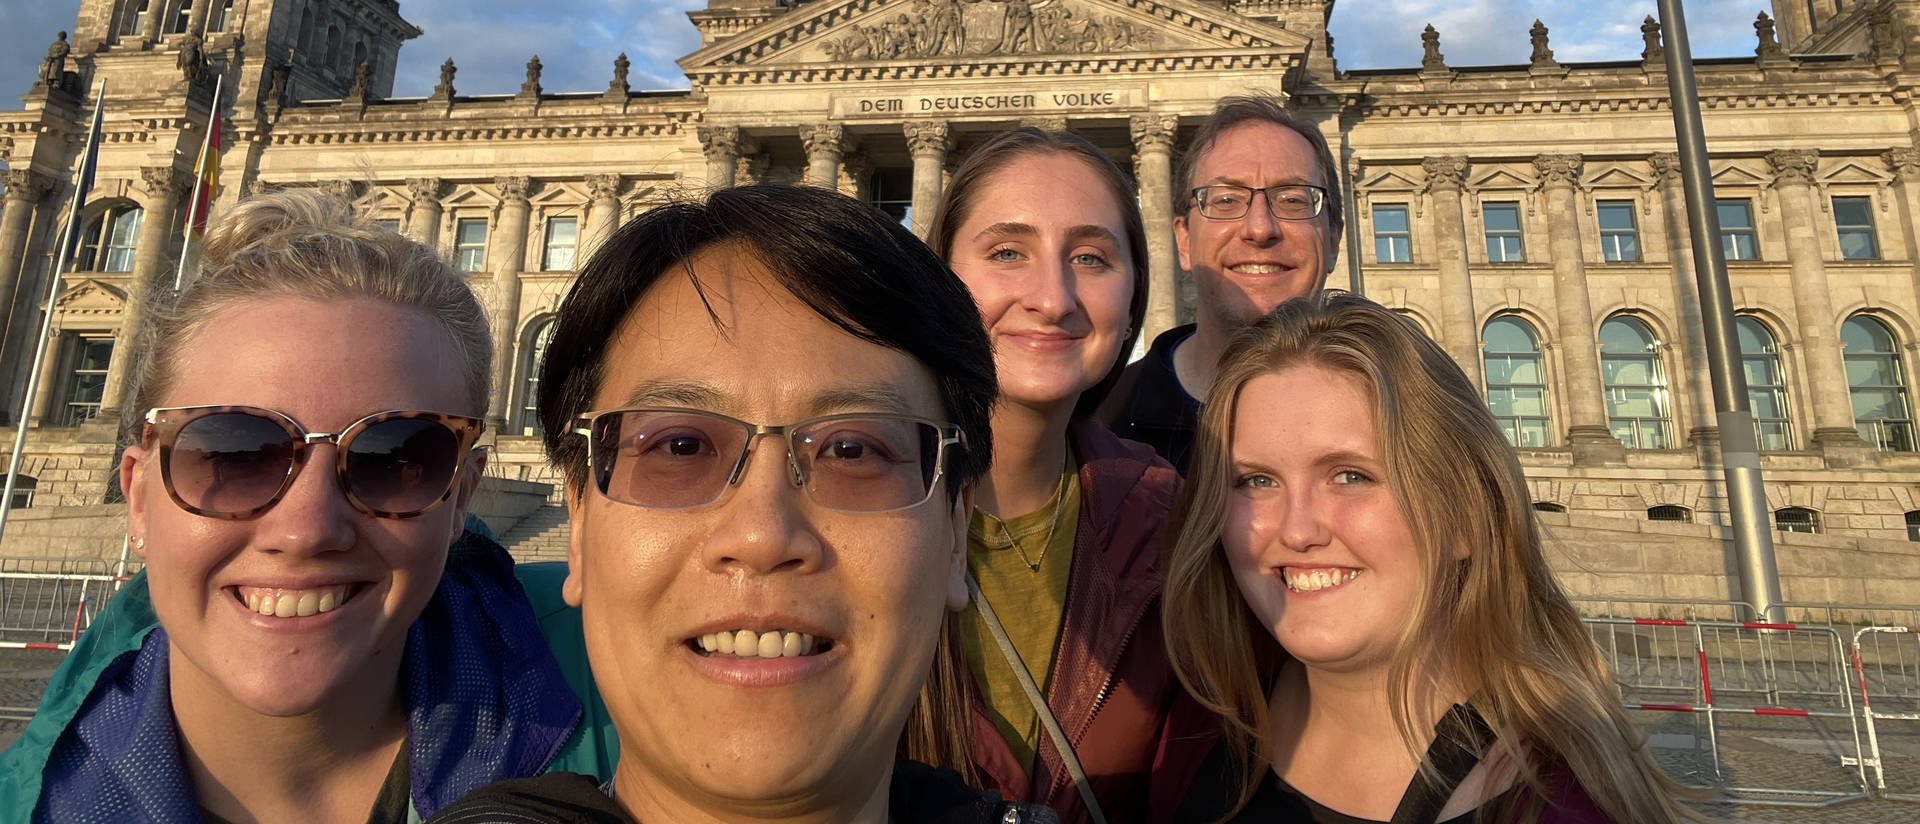 Alyssa Hanson, Dr. Chia-Yu Hsu, Bekah Henn, Dr. Jeff DeGrave and Samantha Maurer (from left) explored Berlin — including the Reichstag Building, which houses the Bundestag, the lower house of Germany's parliament — during a summer immersion program.